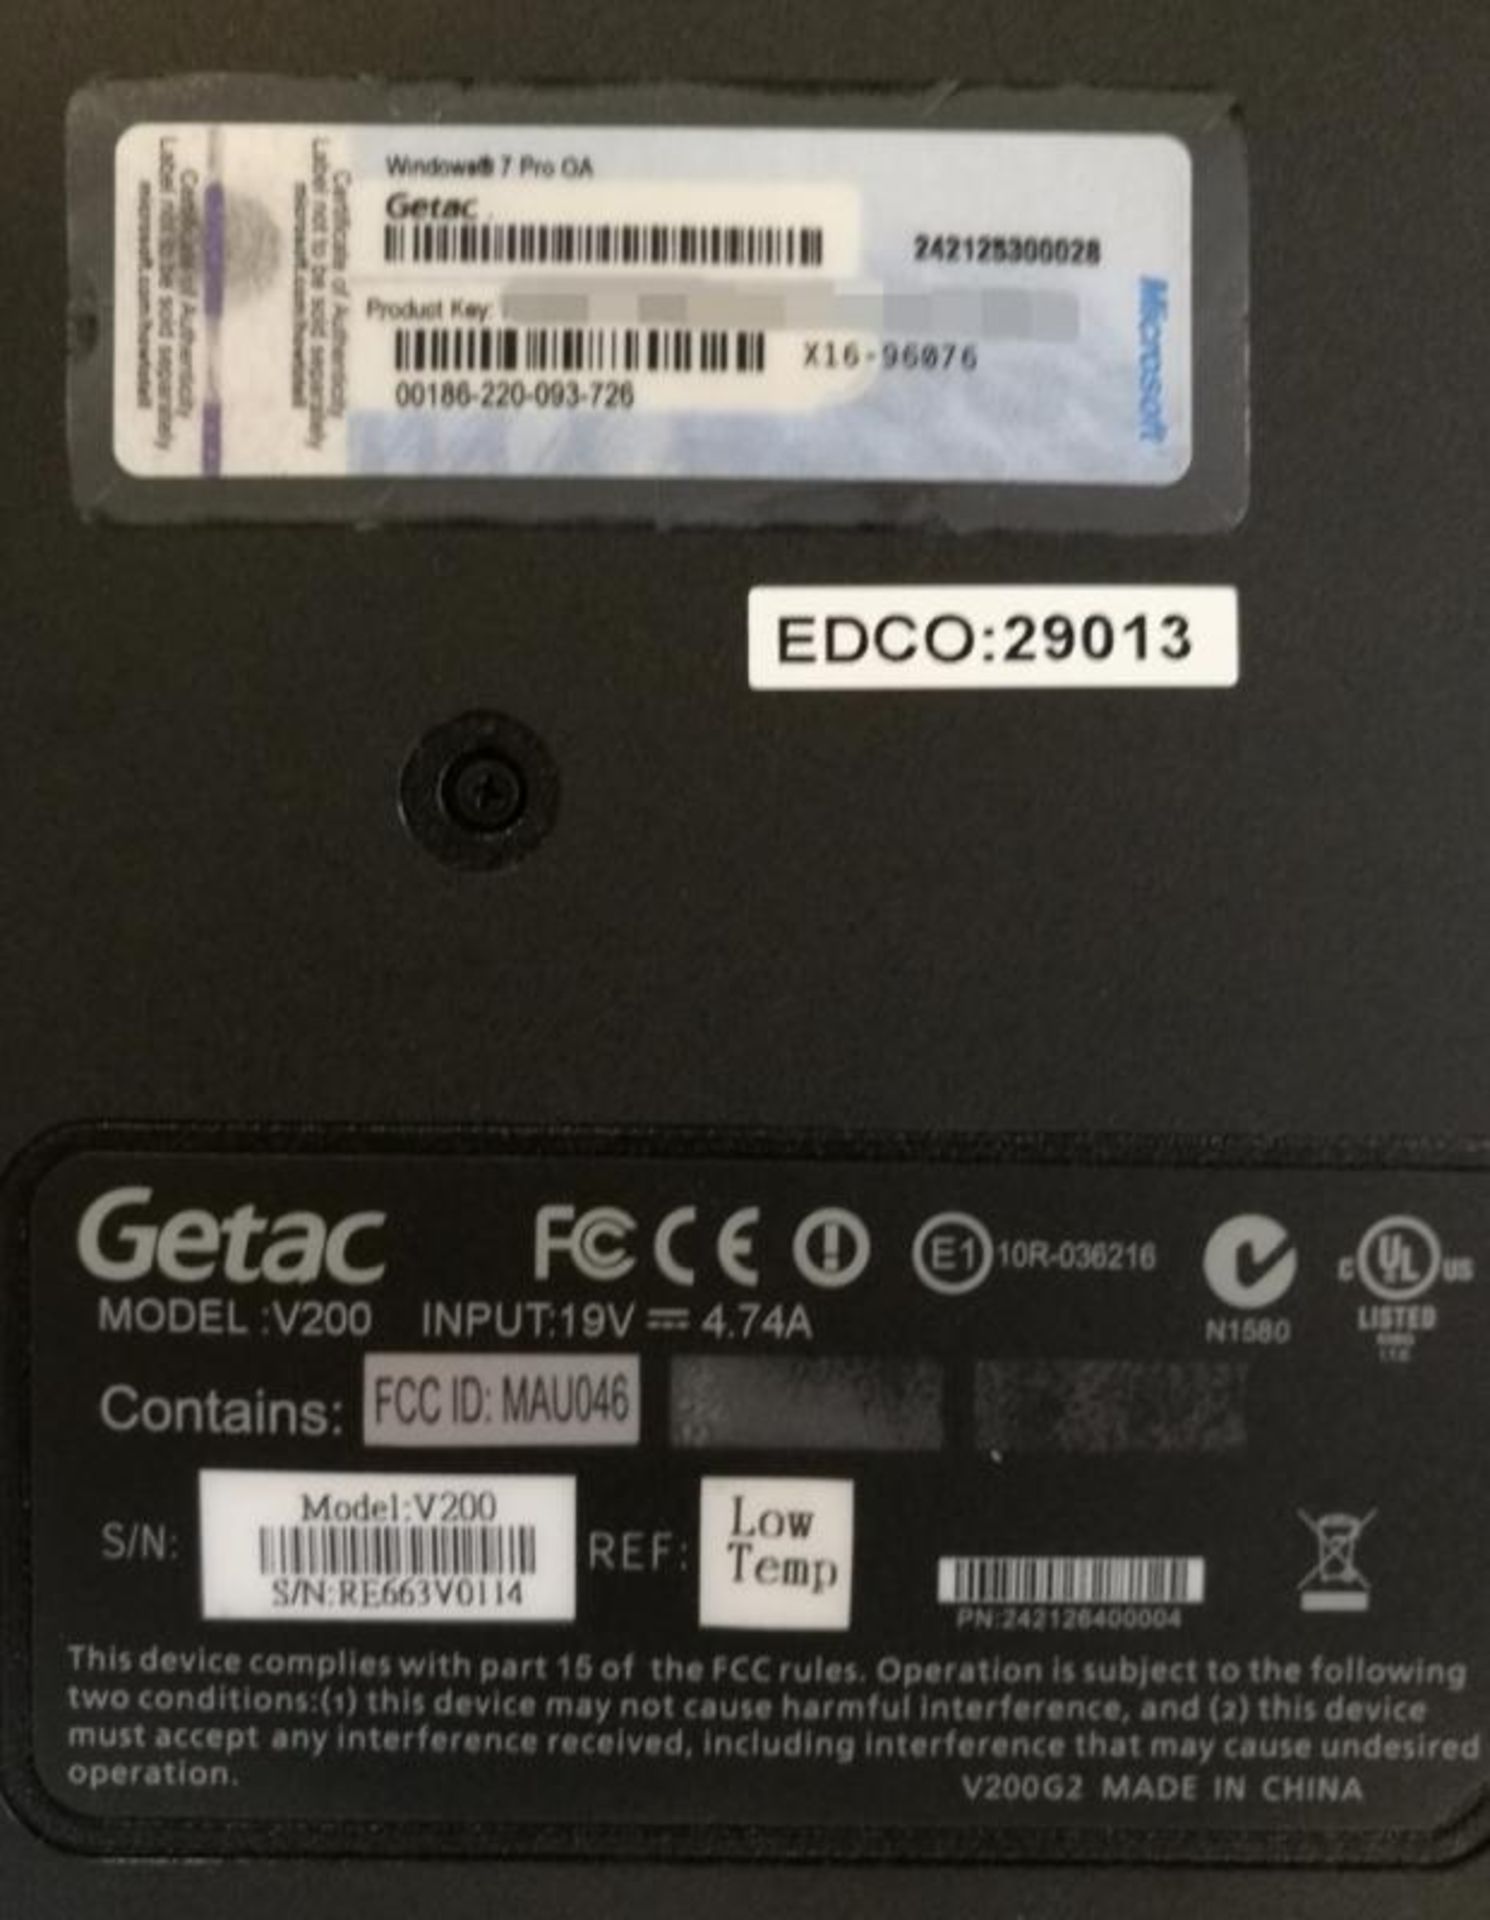 1 x Getac V200 Rugged Laptop Computer - Rugged Laptop That Transforms into a Tablet PC - Features an - Image 3 of 9